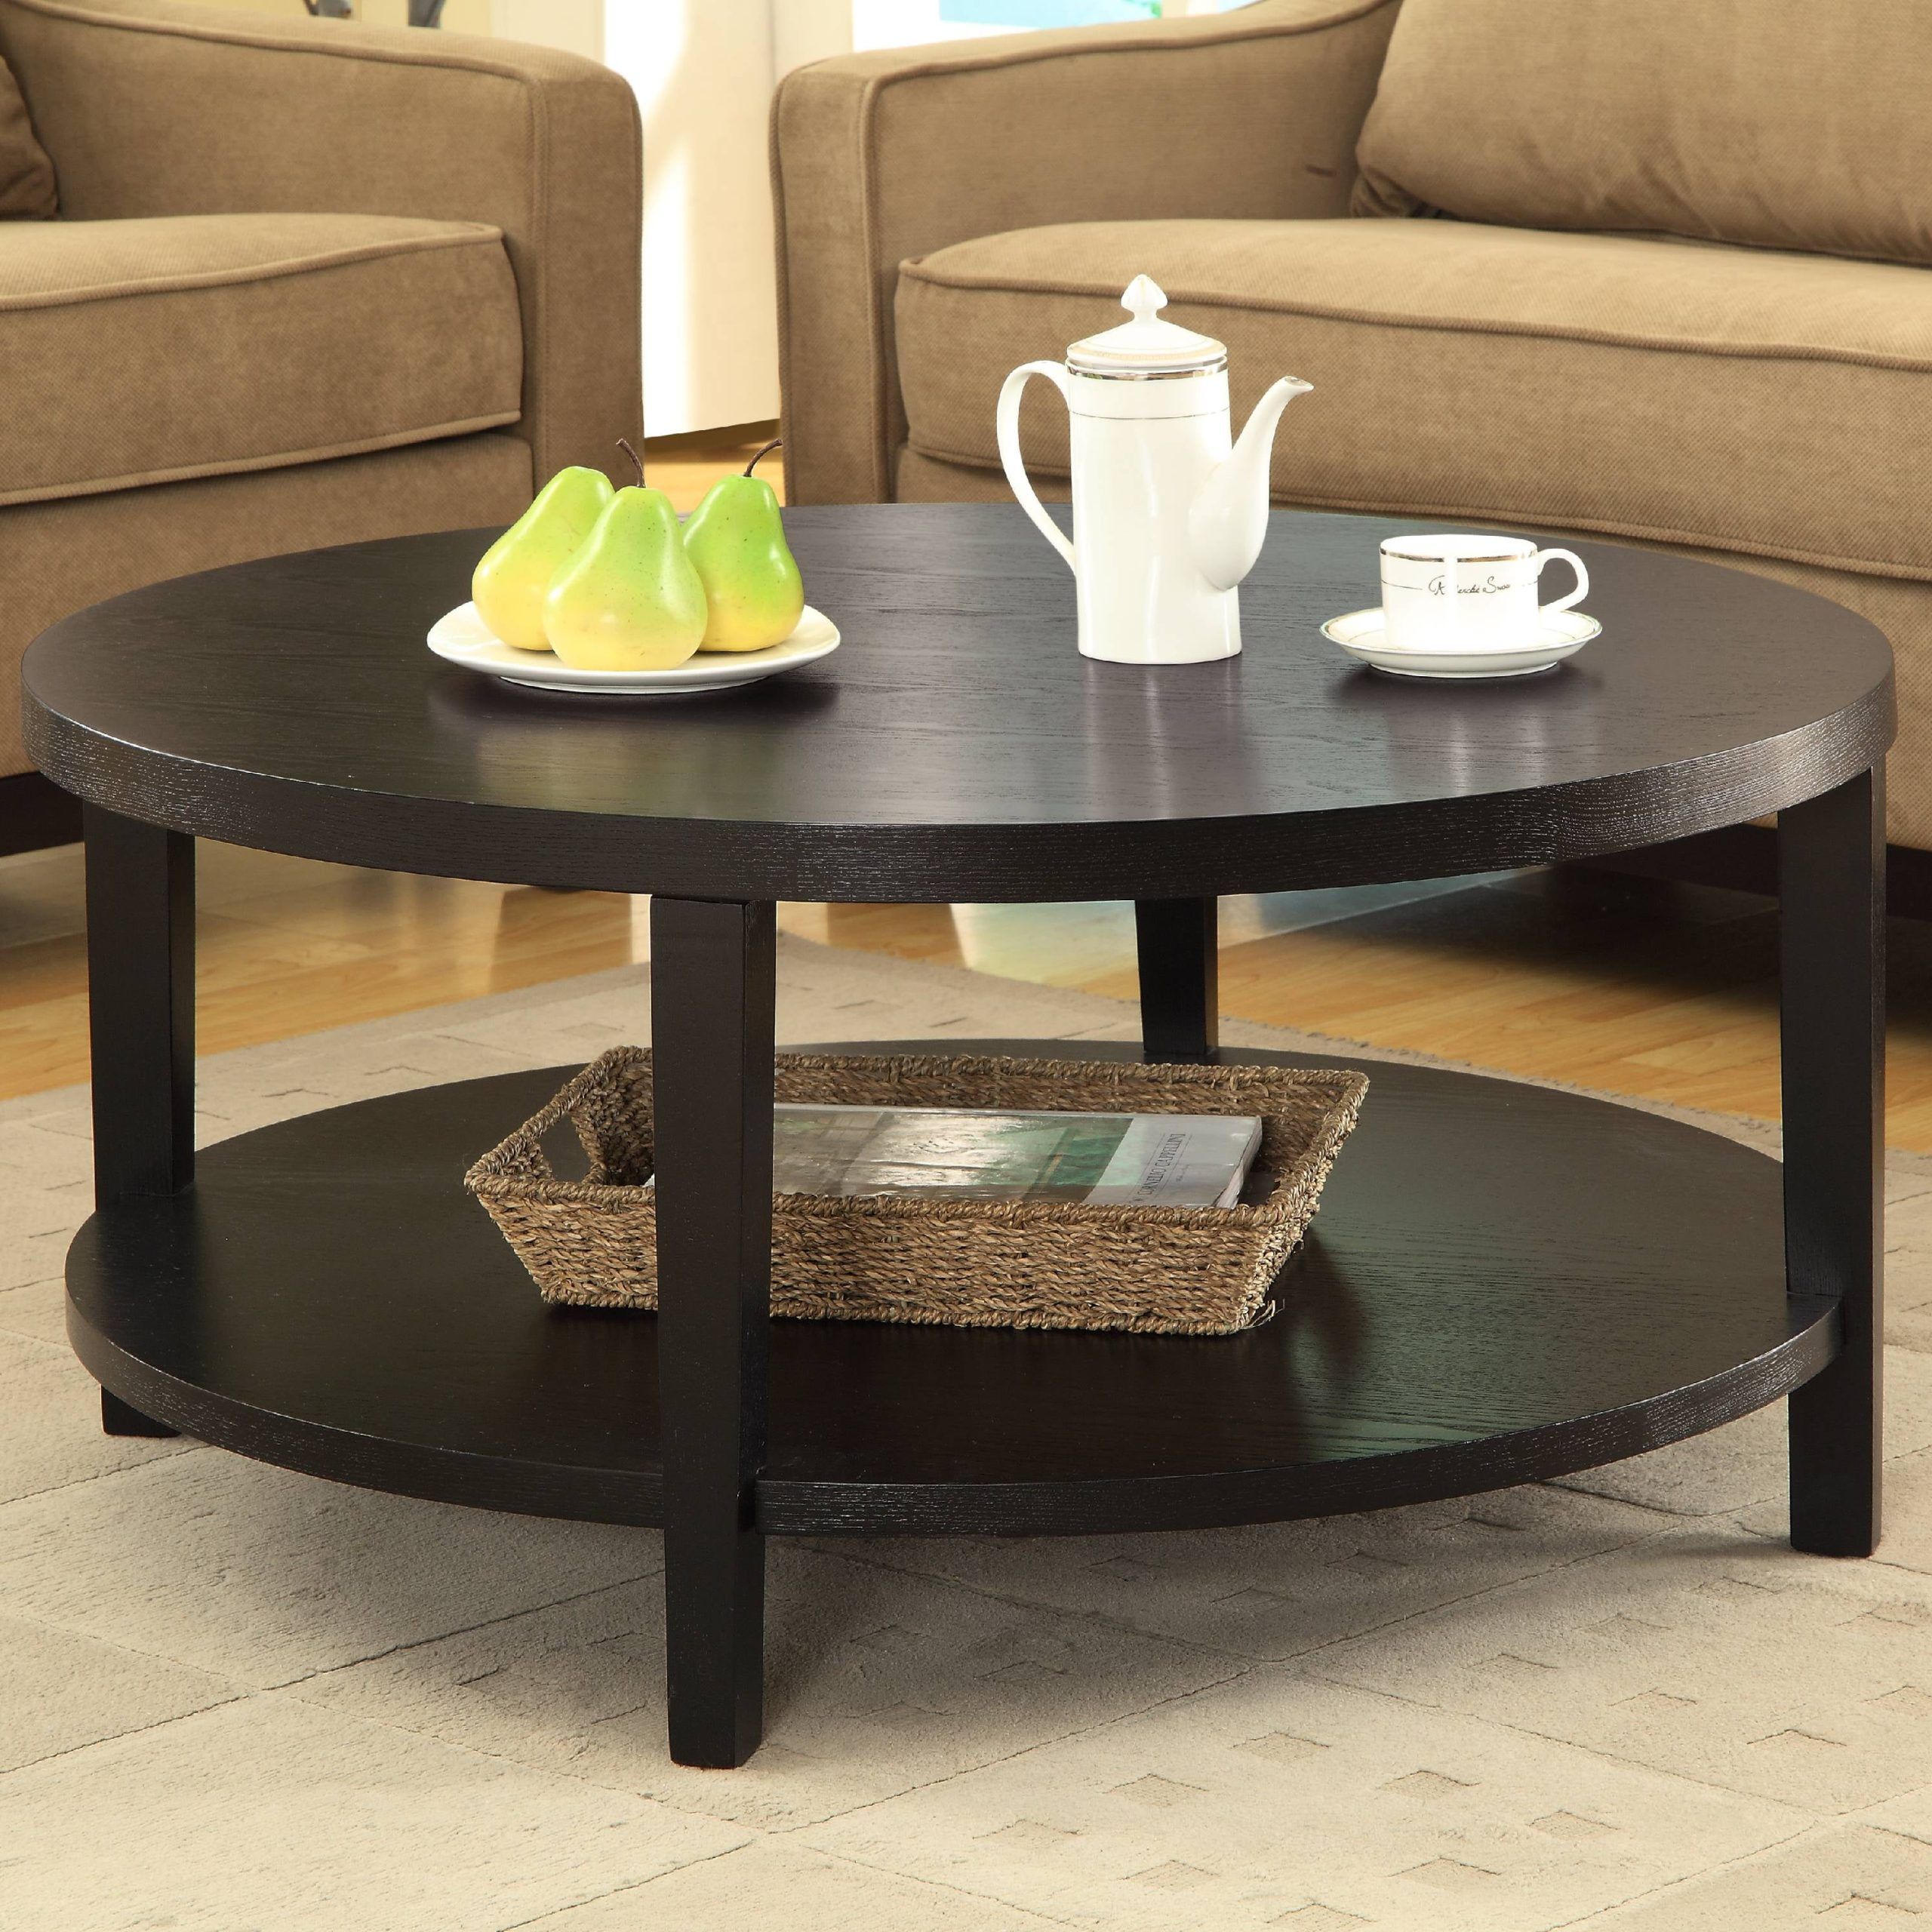 Merge 36" Round Coffee Table – Walmart Intended For Round Coffee Tables With Storage (View 14 of 20)